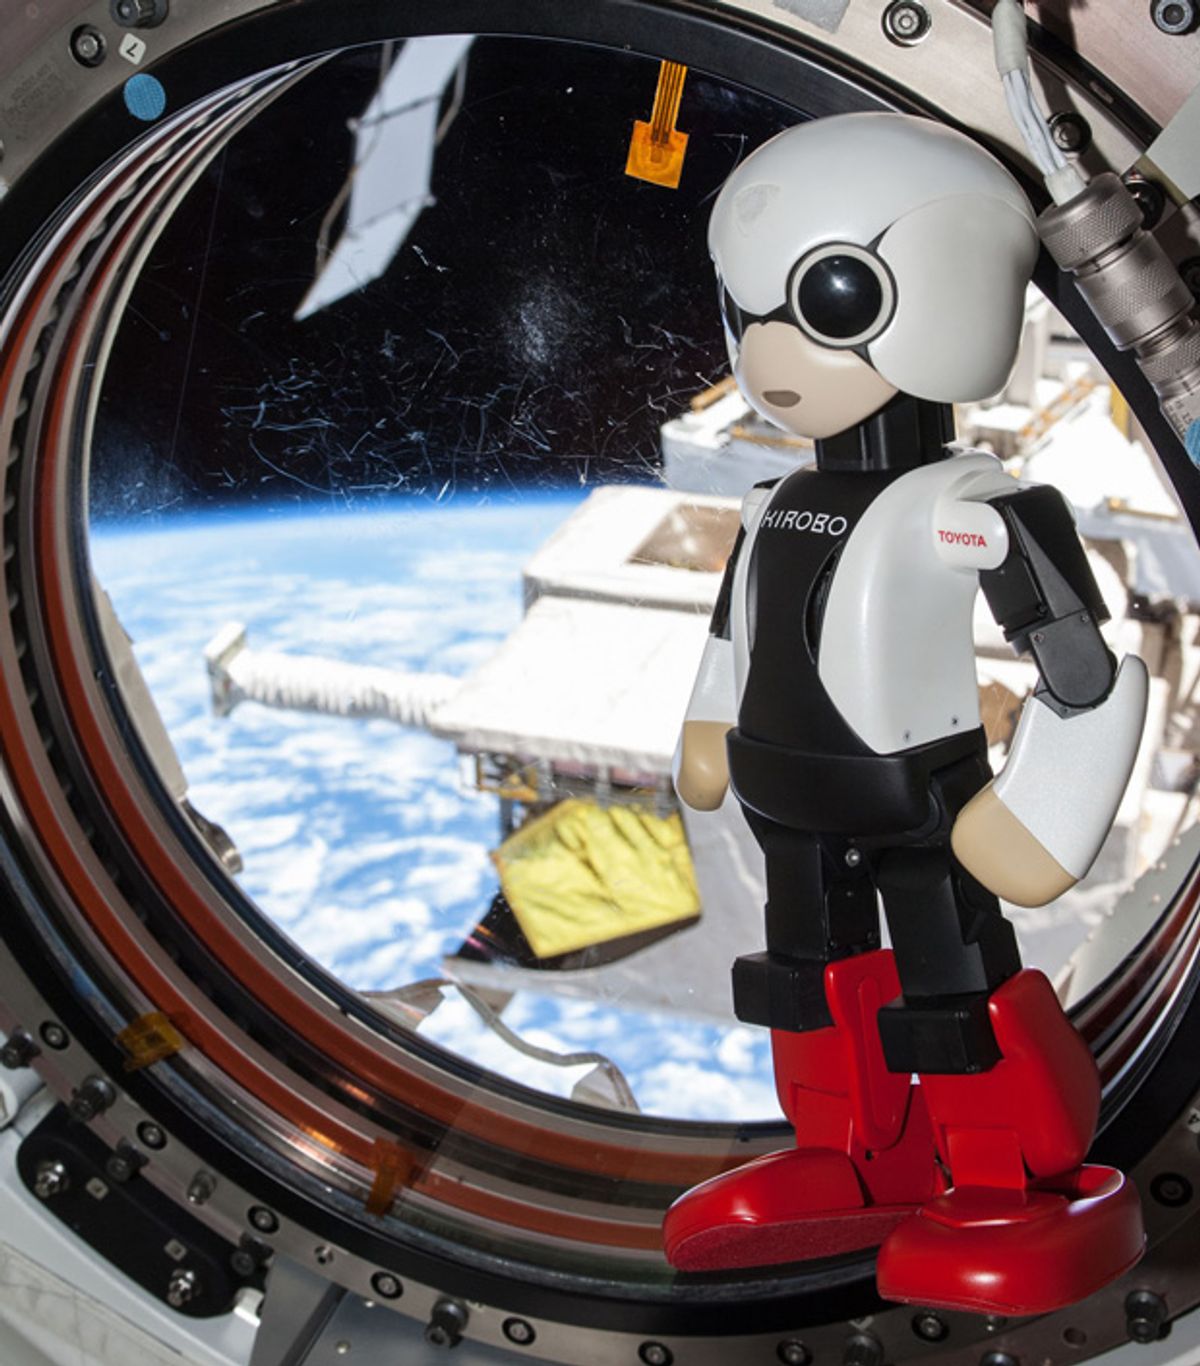 Video Friday: Crossing the Alps, DRC Robots, and Kirobo Goes to Space